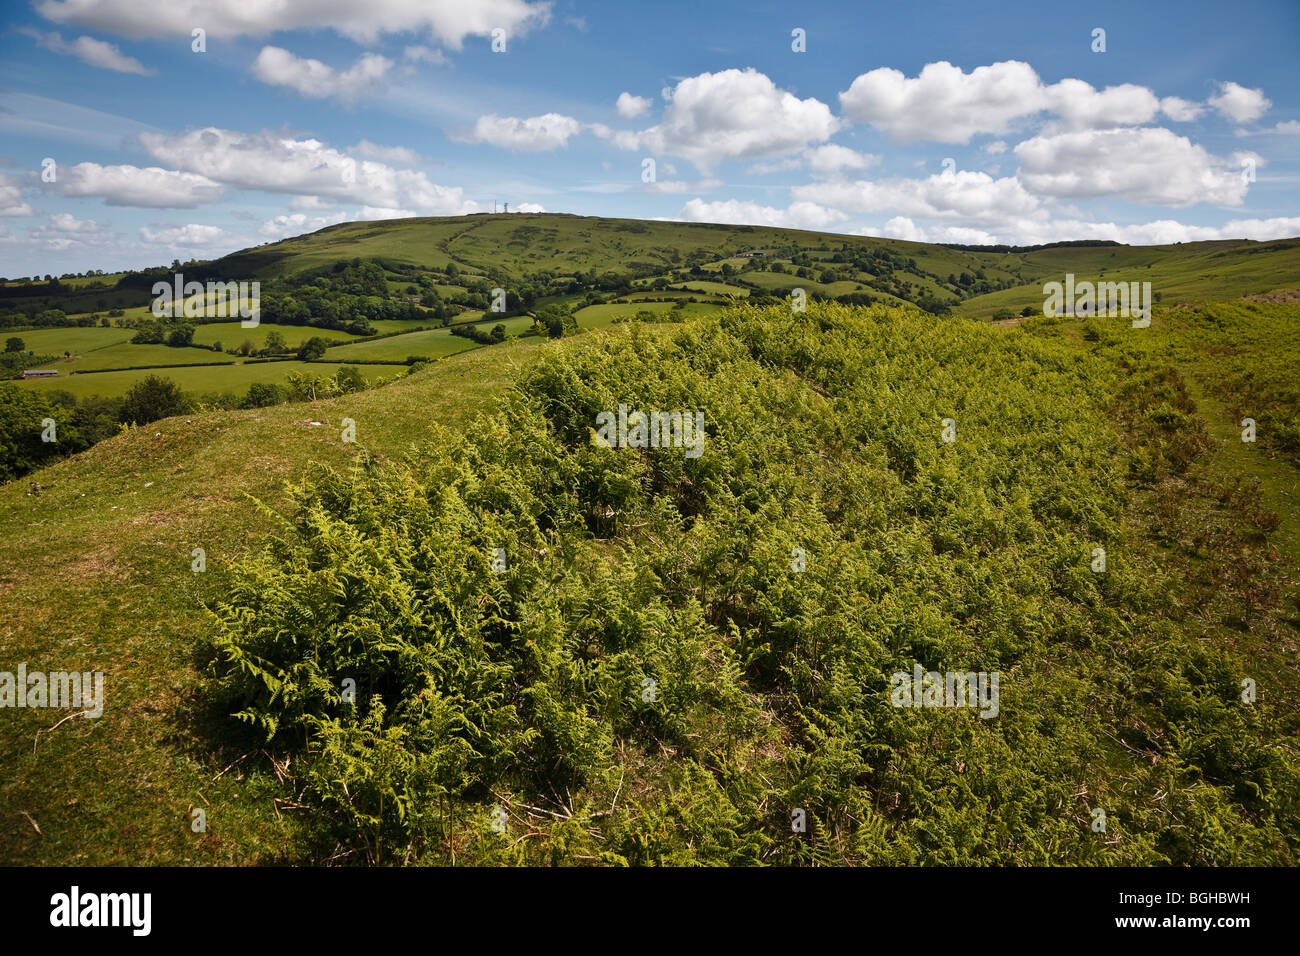 View from Nordy Bank Hill Fort to Abdon Burf, Brown Clee Hill, Shropshire Stock Photo